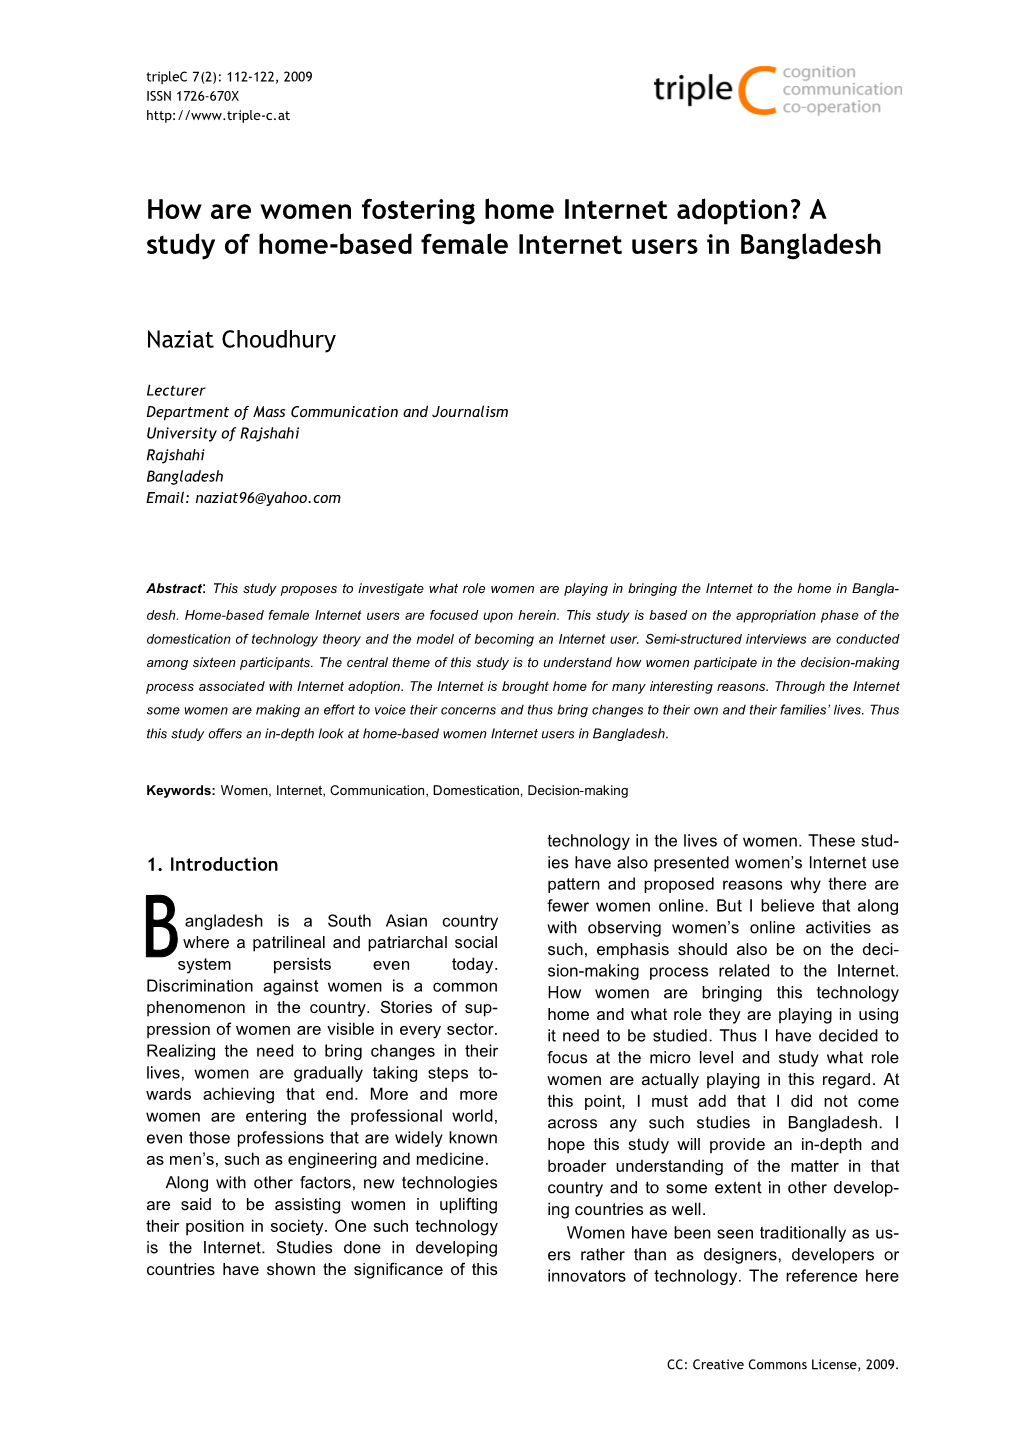 A Study of Home-Based Female Internet Users in Bangladesh